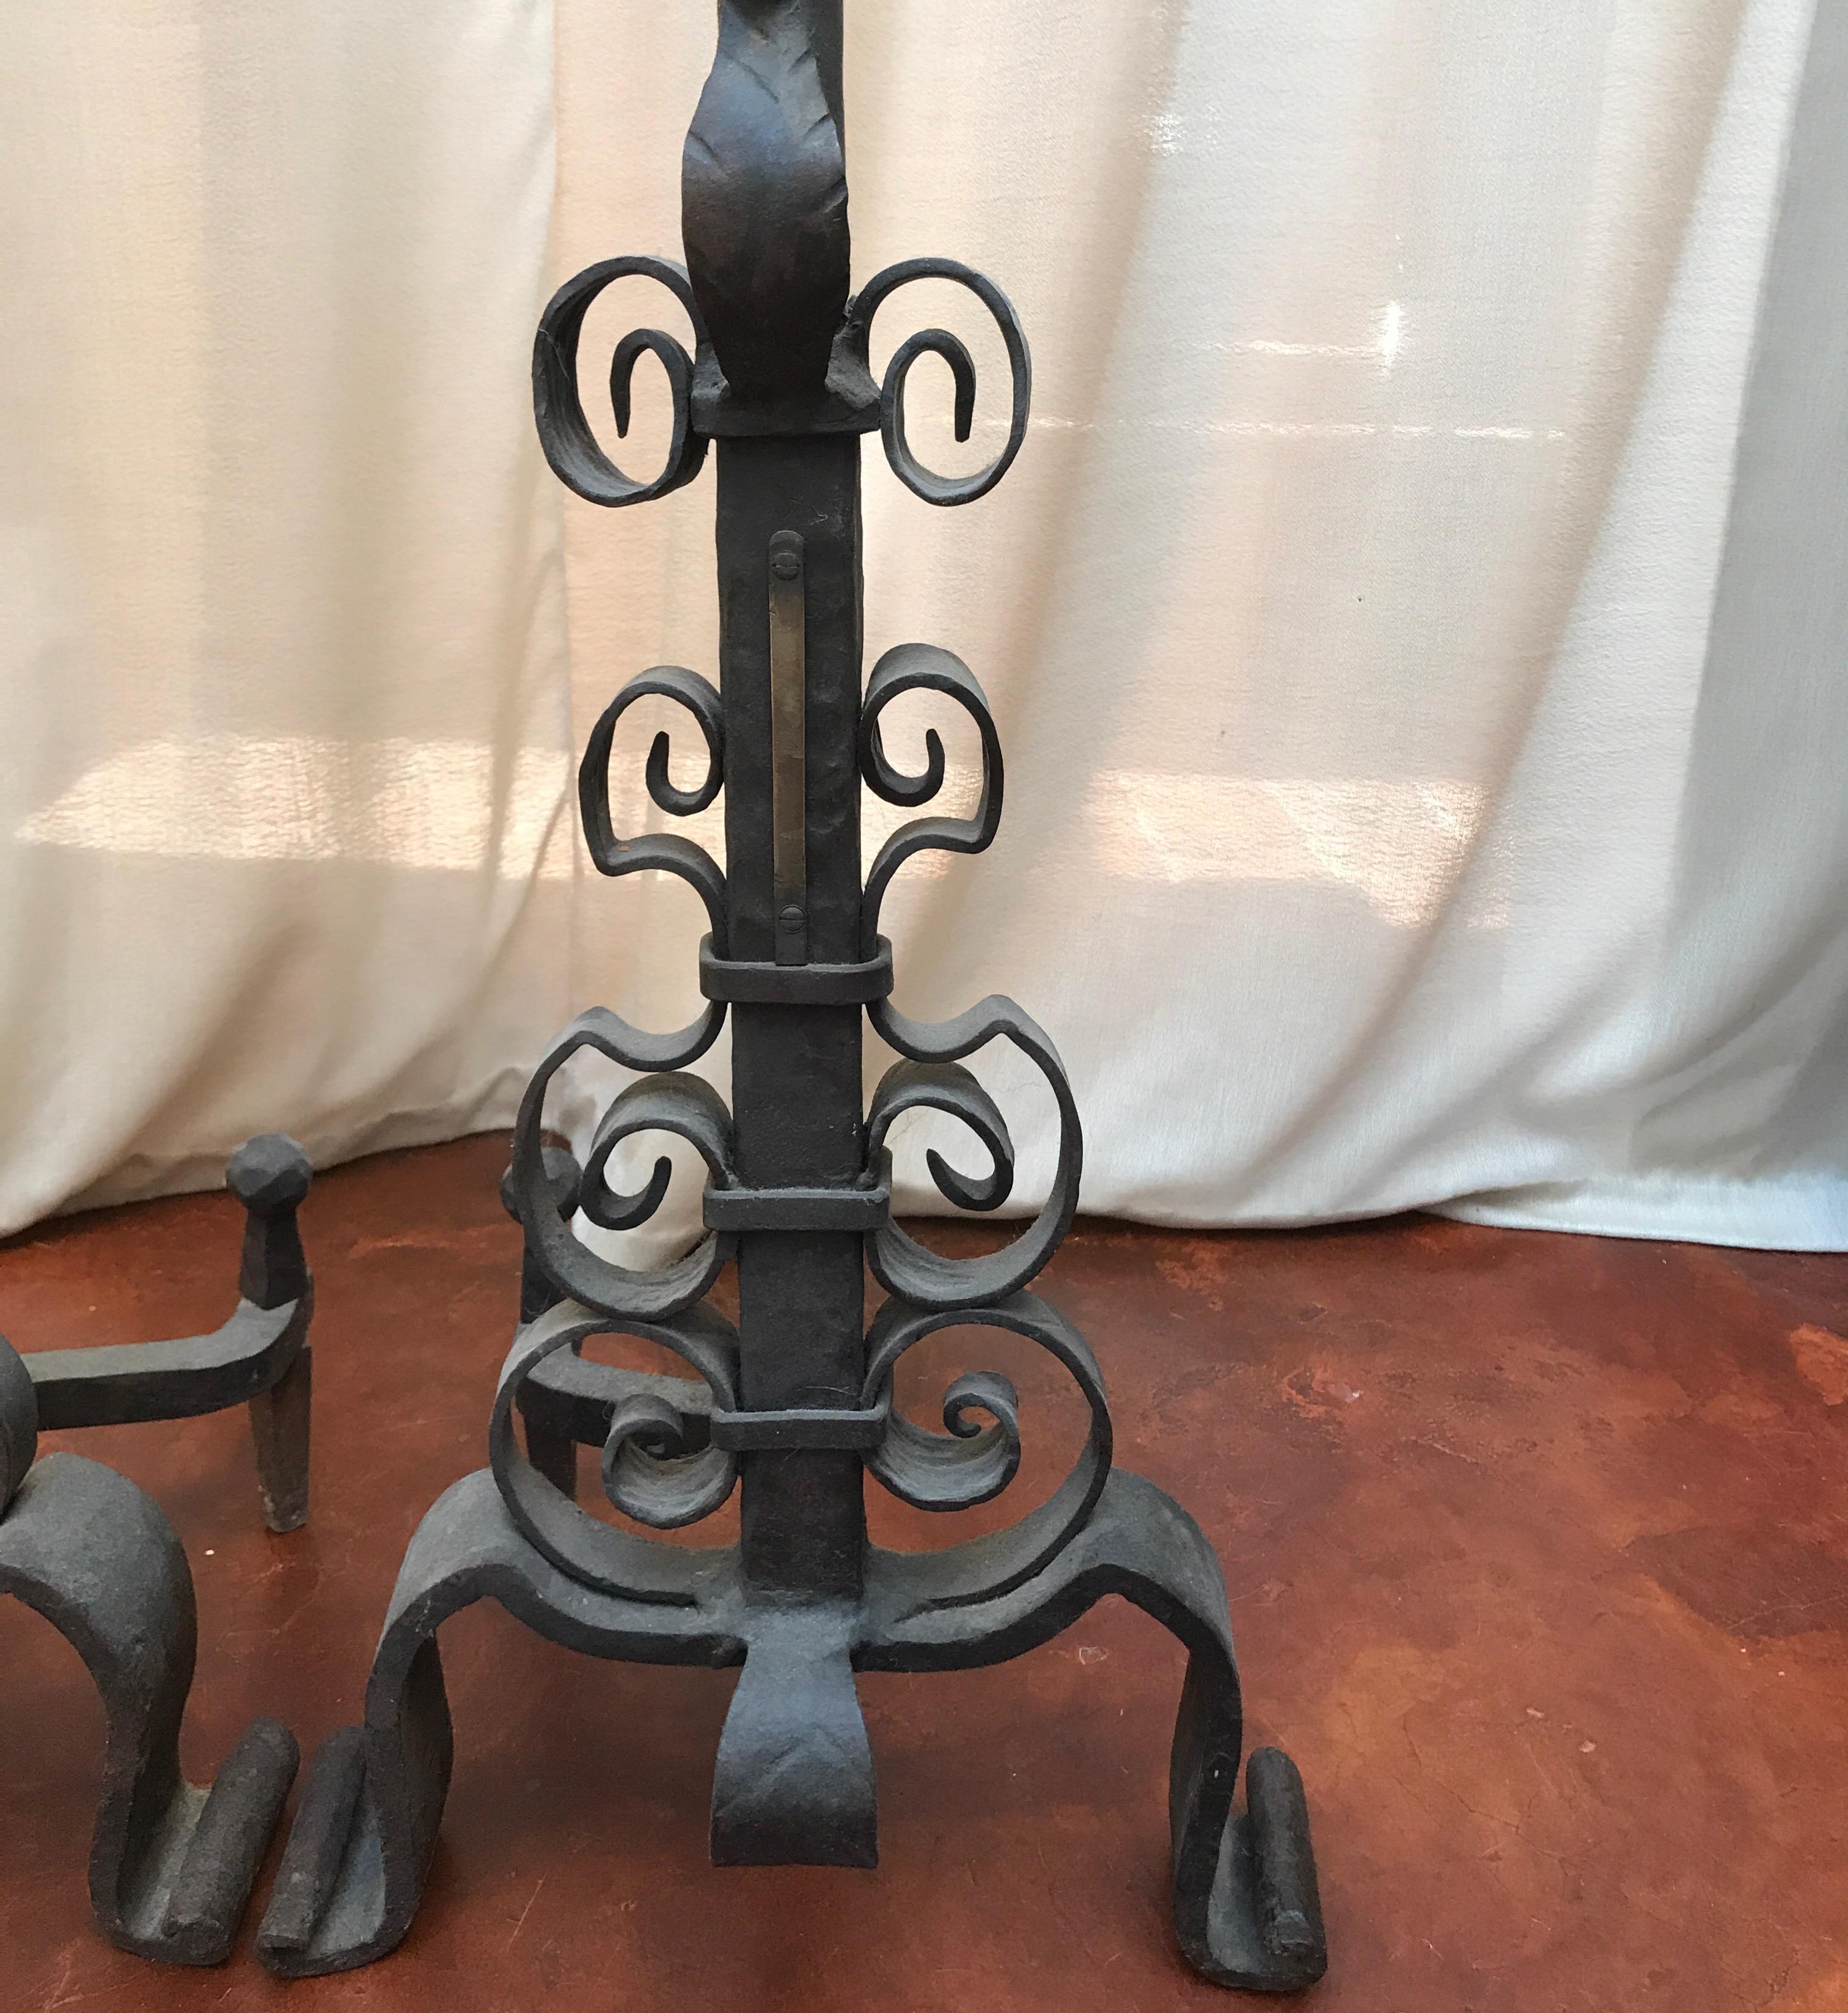 This pair of andirons are very heavy and large made of Iron and brass from the 19th century. The scroll work continuous down the center shaft and they rest on two feet with a curved iron leg. On the top of the andirons are brass balls held with a